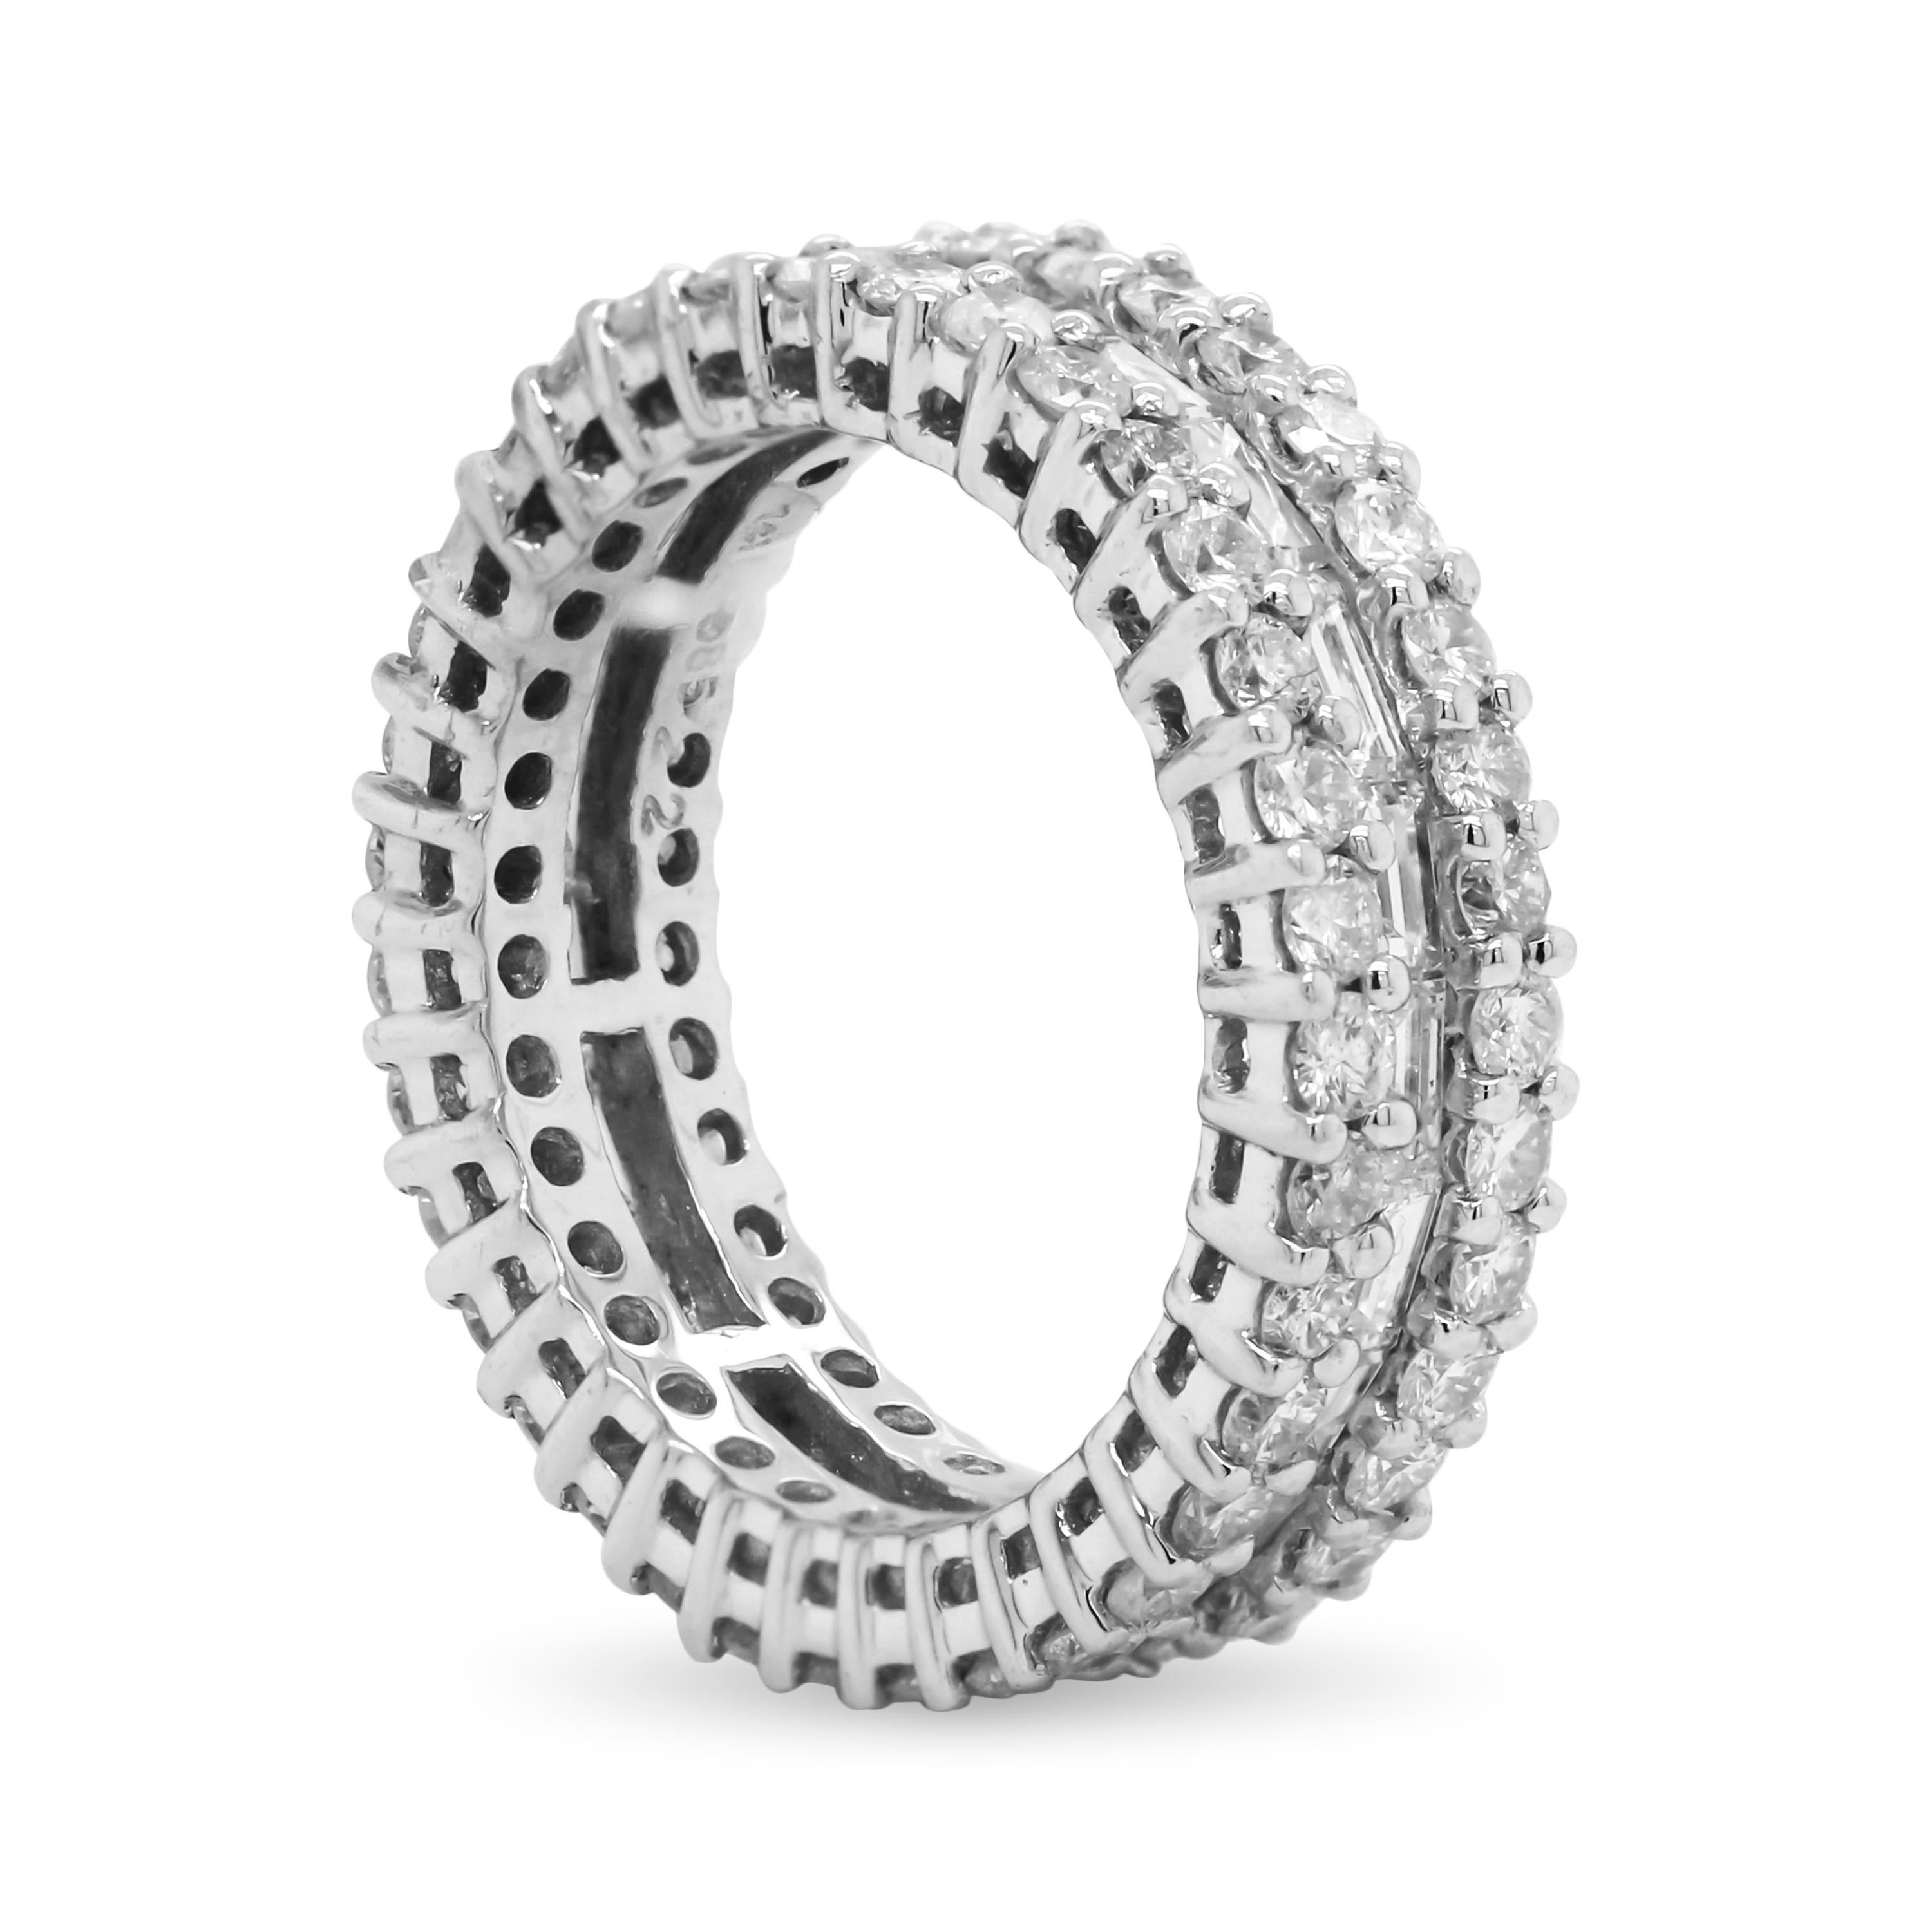 14k White Gold Eternity Band with Round and Baguette Diamonds

Apprx. 2.80 carat H color, SI Clarity diamonds total weight

6mm band width.

Size 6 